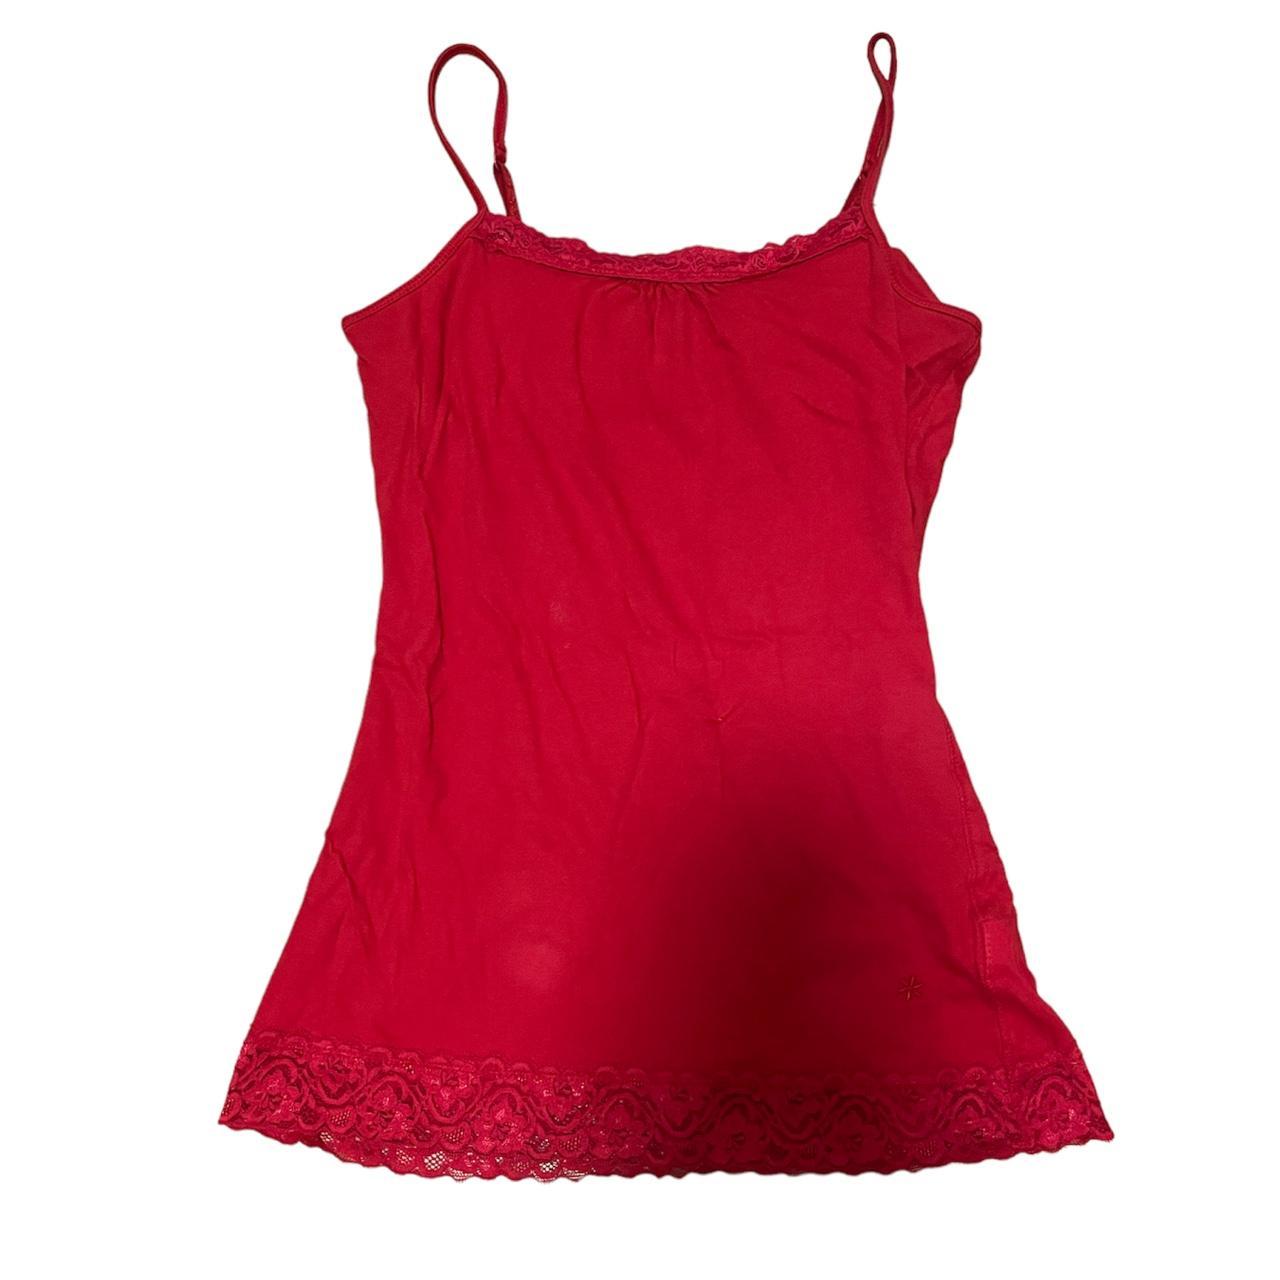 2000s cherry red lace cami tank top size small... - Depop